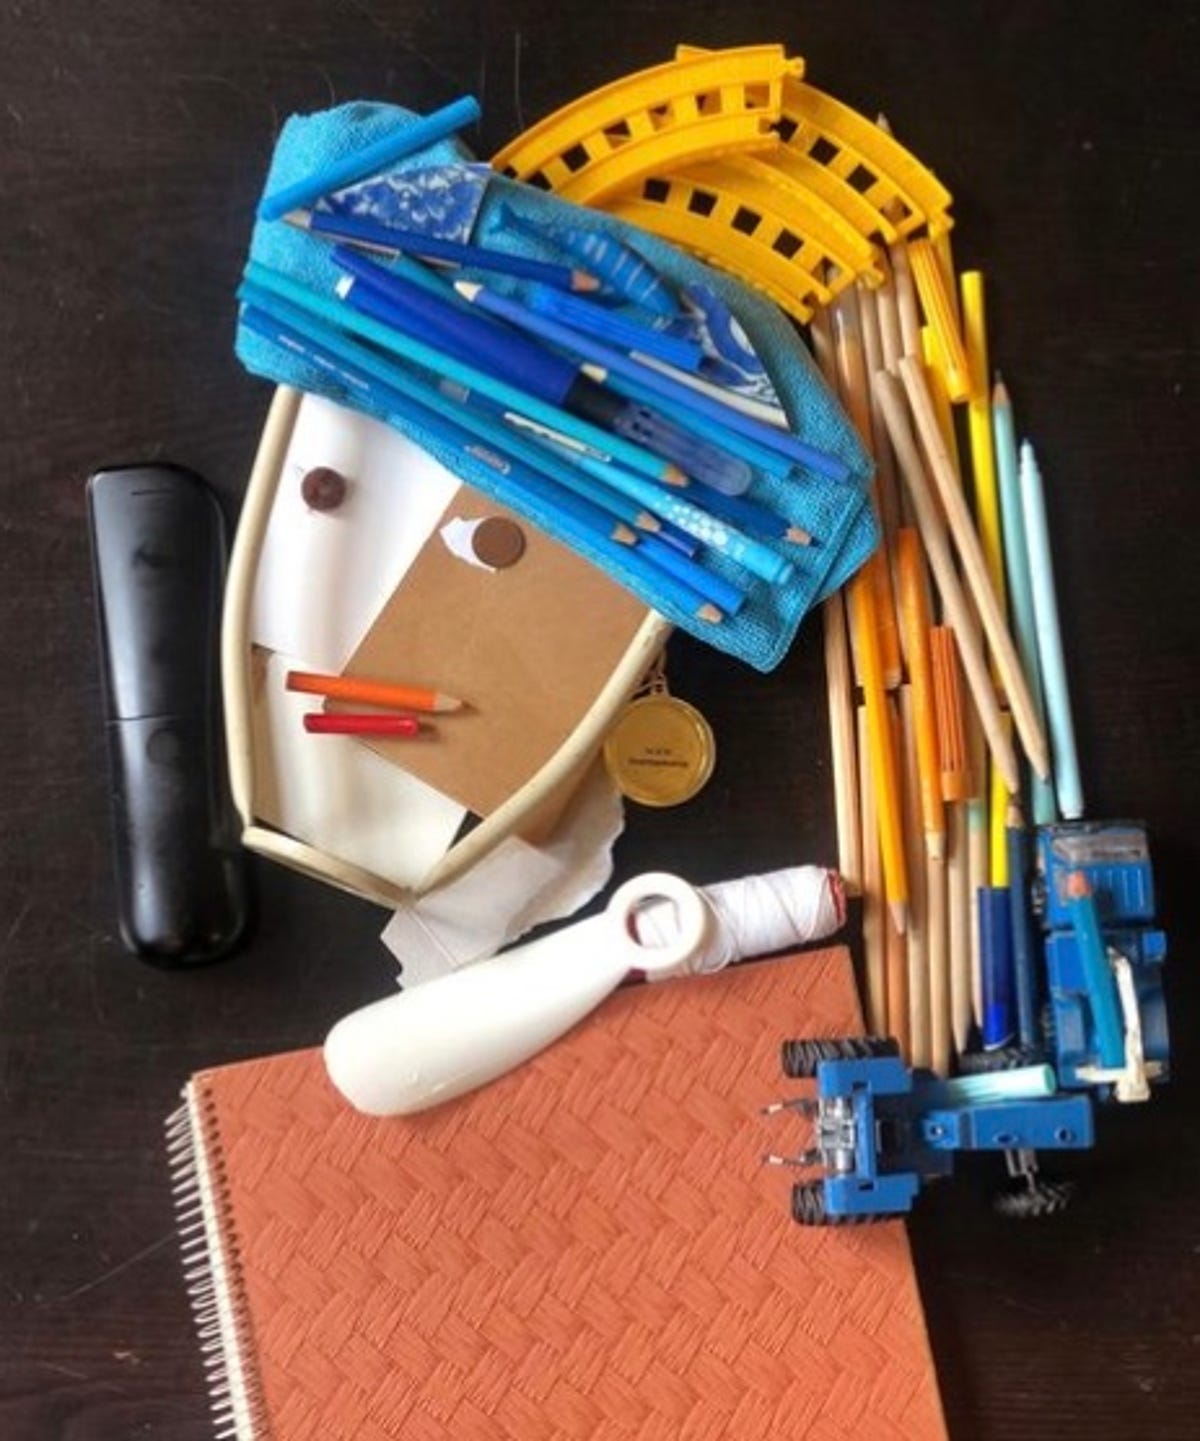 Pencils and other school supplies made into the shape of Girl With a Pearl Earring